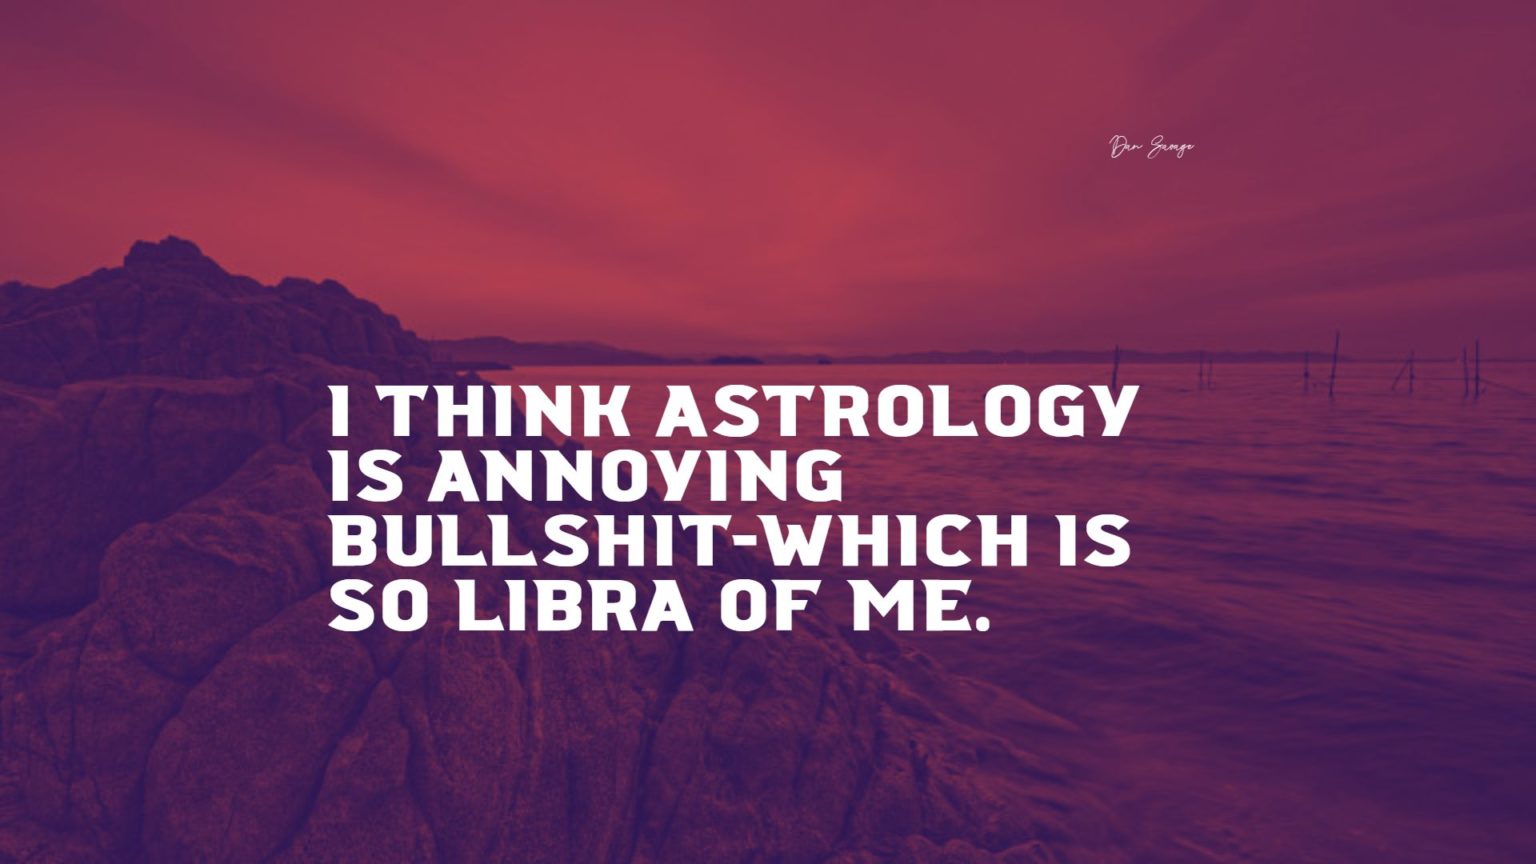 astrology images and quotes